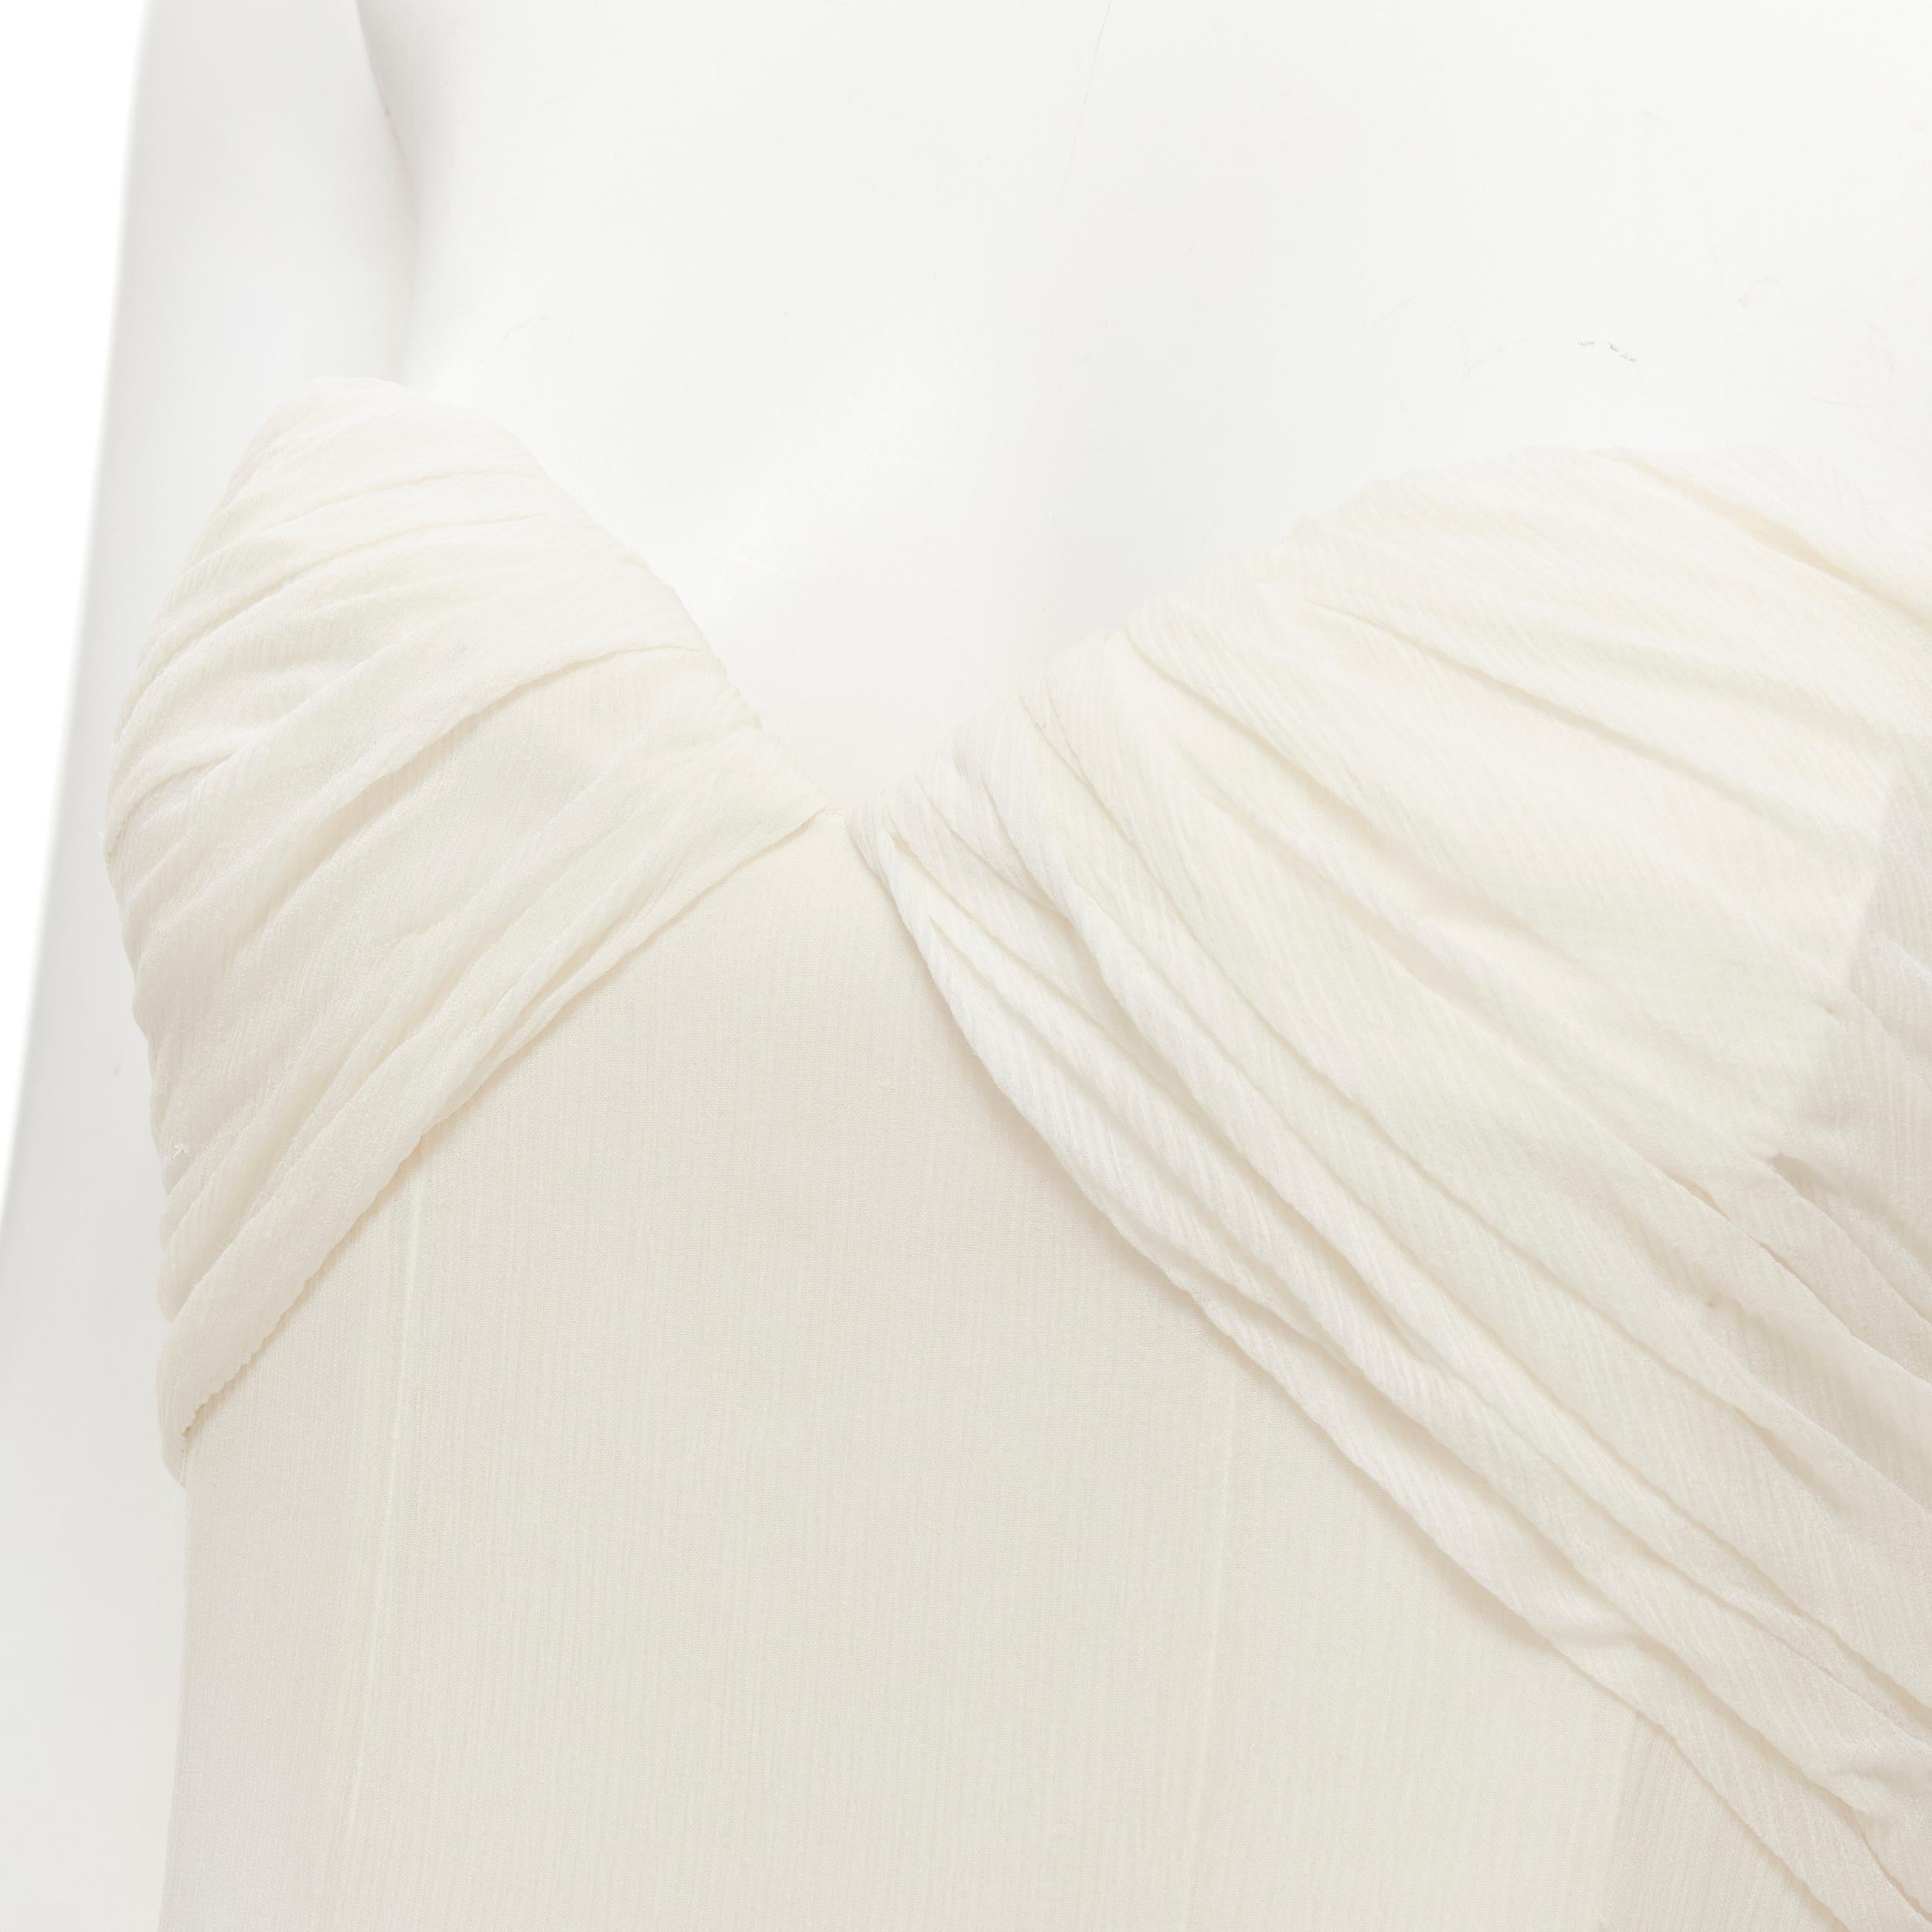 OSCAR DE LA RENTA ivory white boned corset strapless evening gown dress US0 XS Reference: LNKO/A01847 
Brand: Oscar De La Renta 
Designer: Oscar De La Renta 
Material: Silk 
Color: White 
Pattern: Solid 
Closure: Zip 
Extra Detail: Boned corset